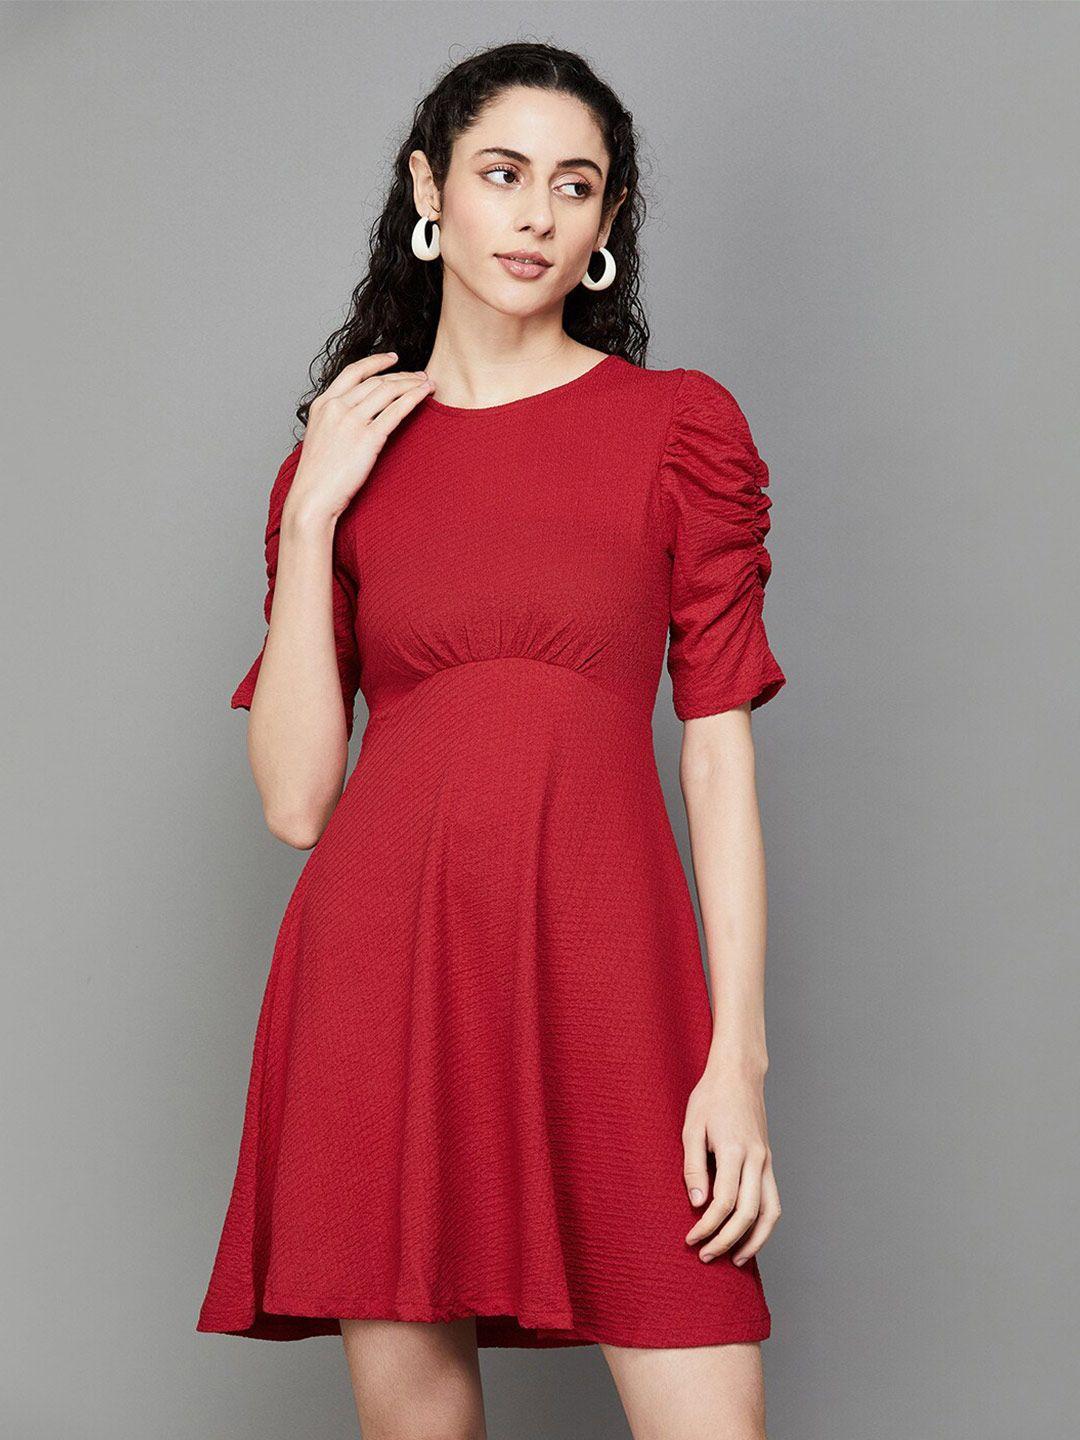 ginger-by-lifestyle-round-neck-puff-sleeves-a-line-dress